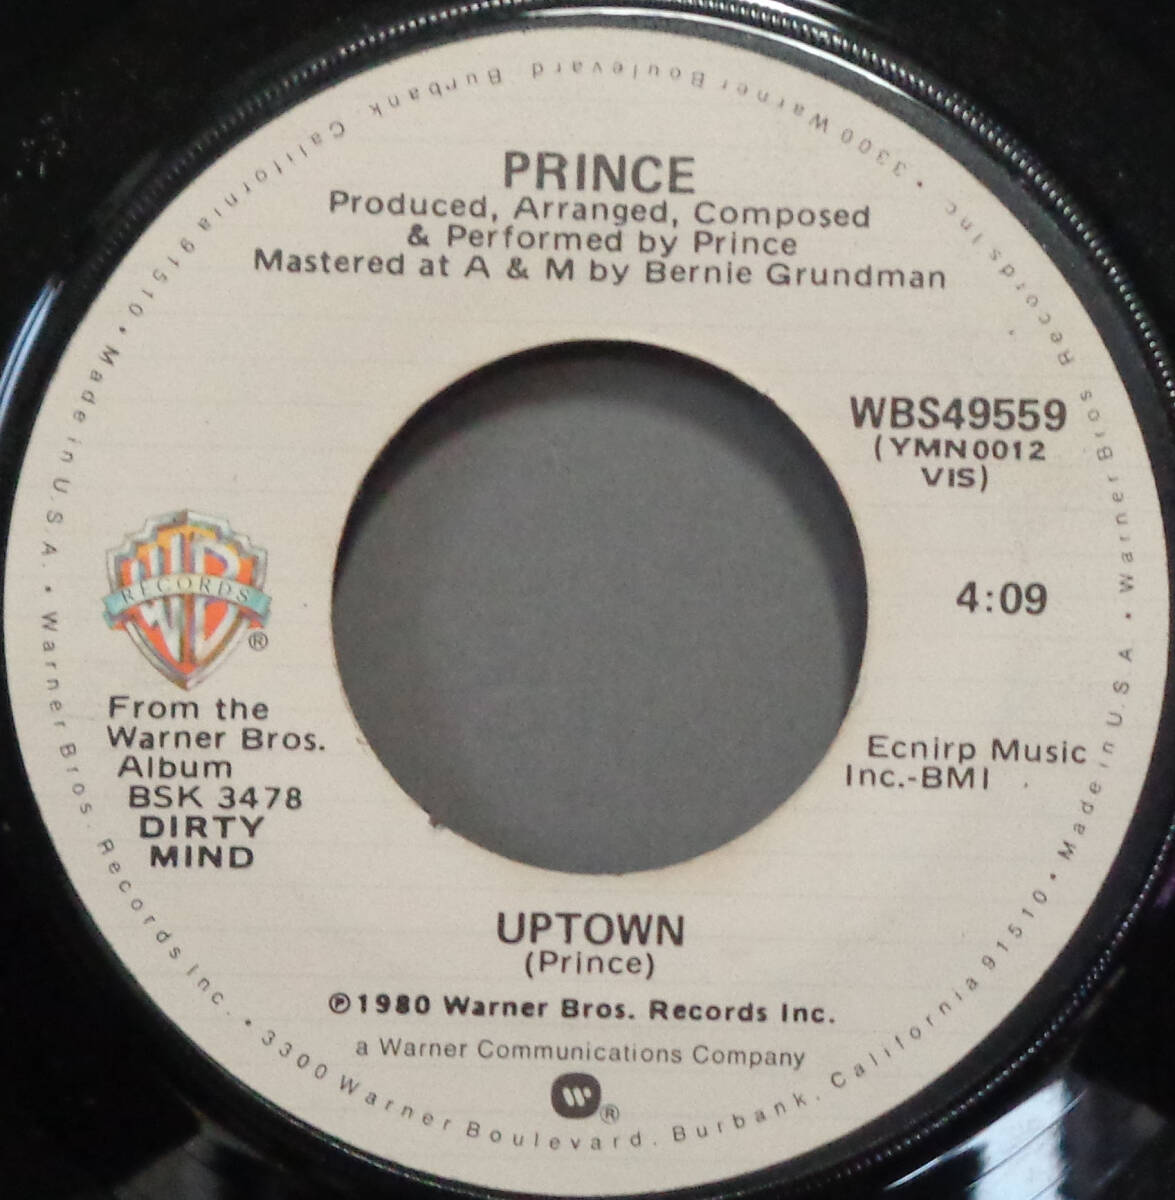 【SOUL 45】PRINCE - UPTOWN / CRAZY YOU (s240415032) の画像1